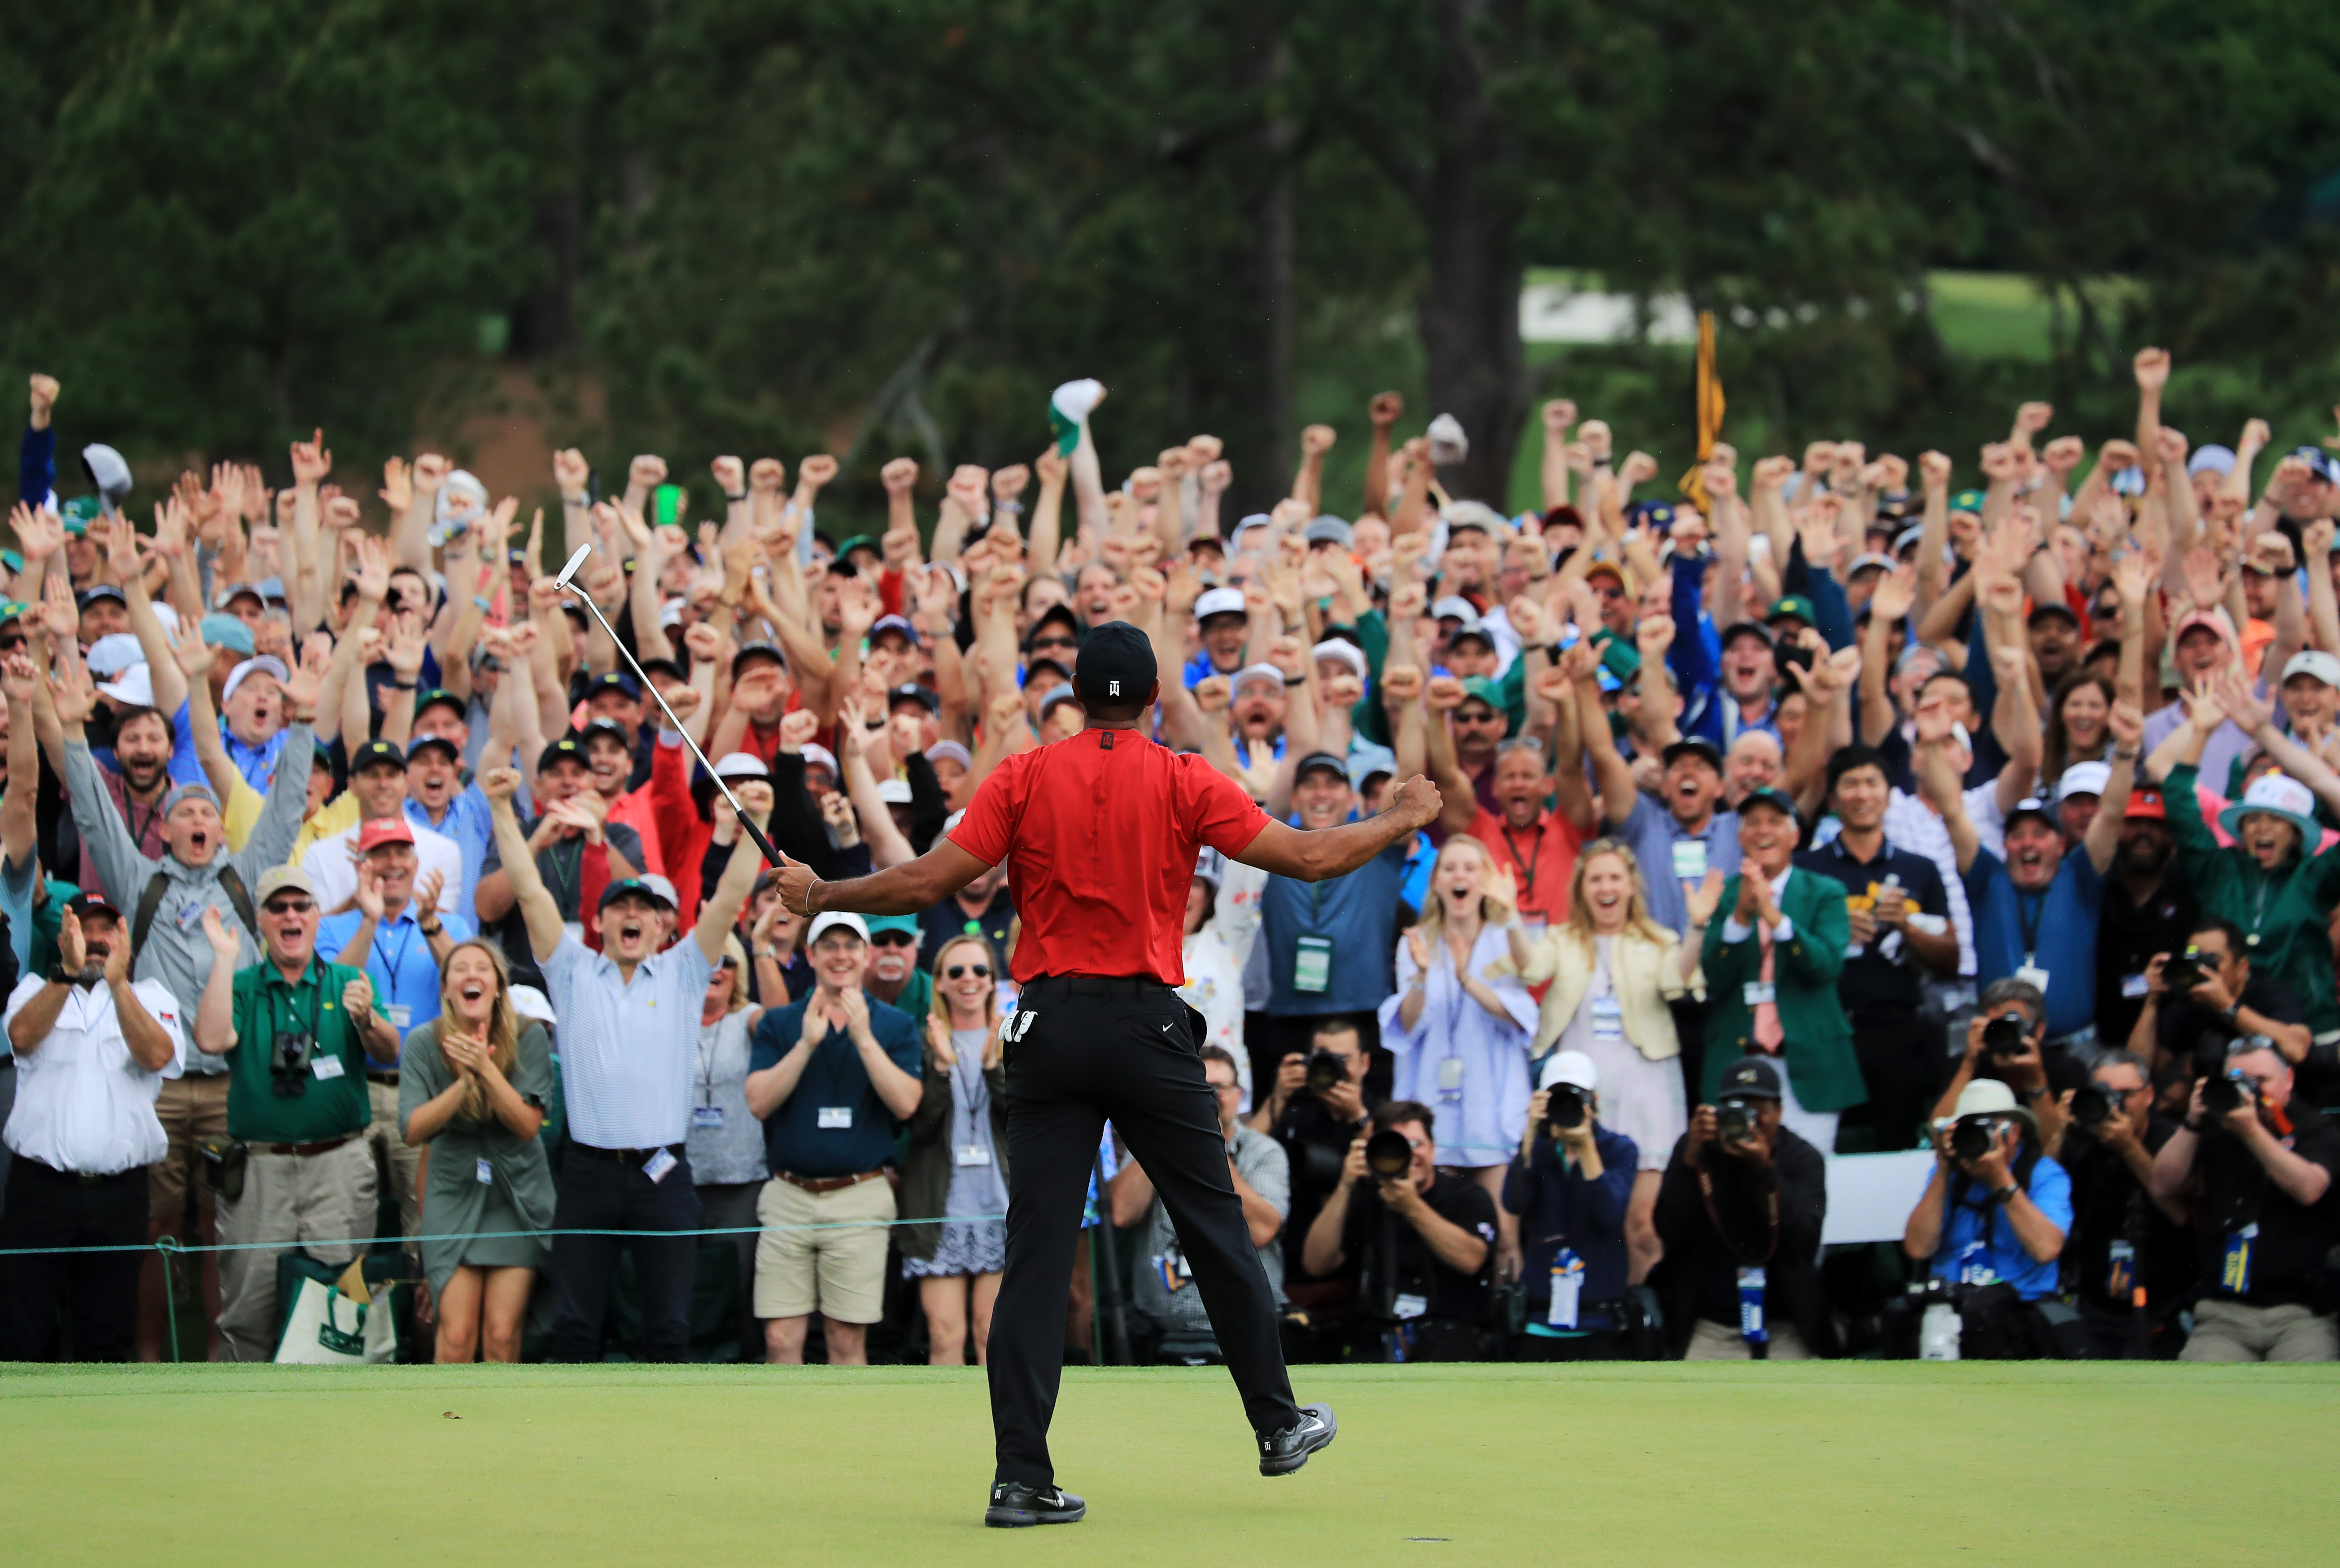 Why Tiger Woods' 2019 Masters win meant so much to one writer, who was,  admittedly, cheering from the pressbox | Golf News and Tour Information |  Golf Digest